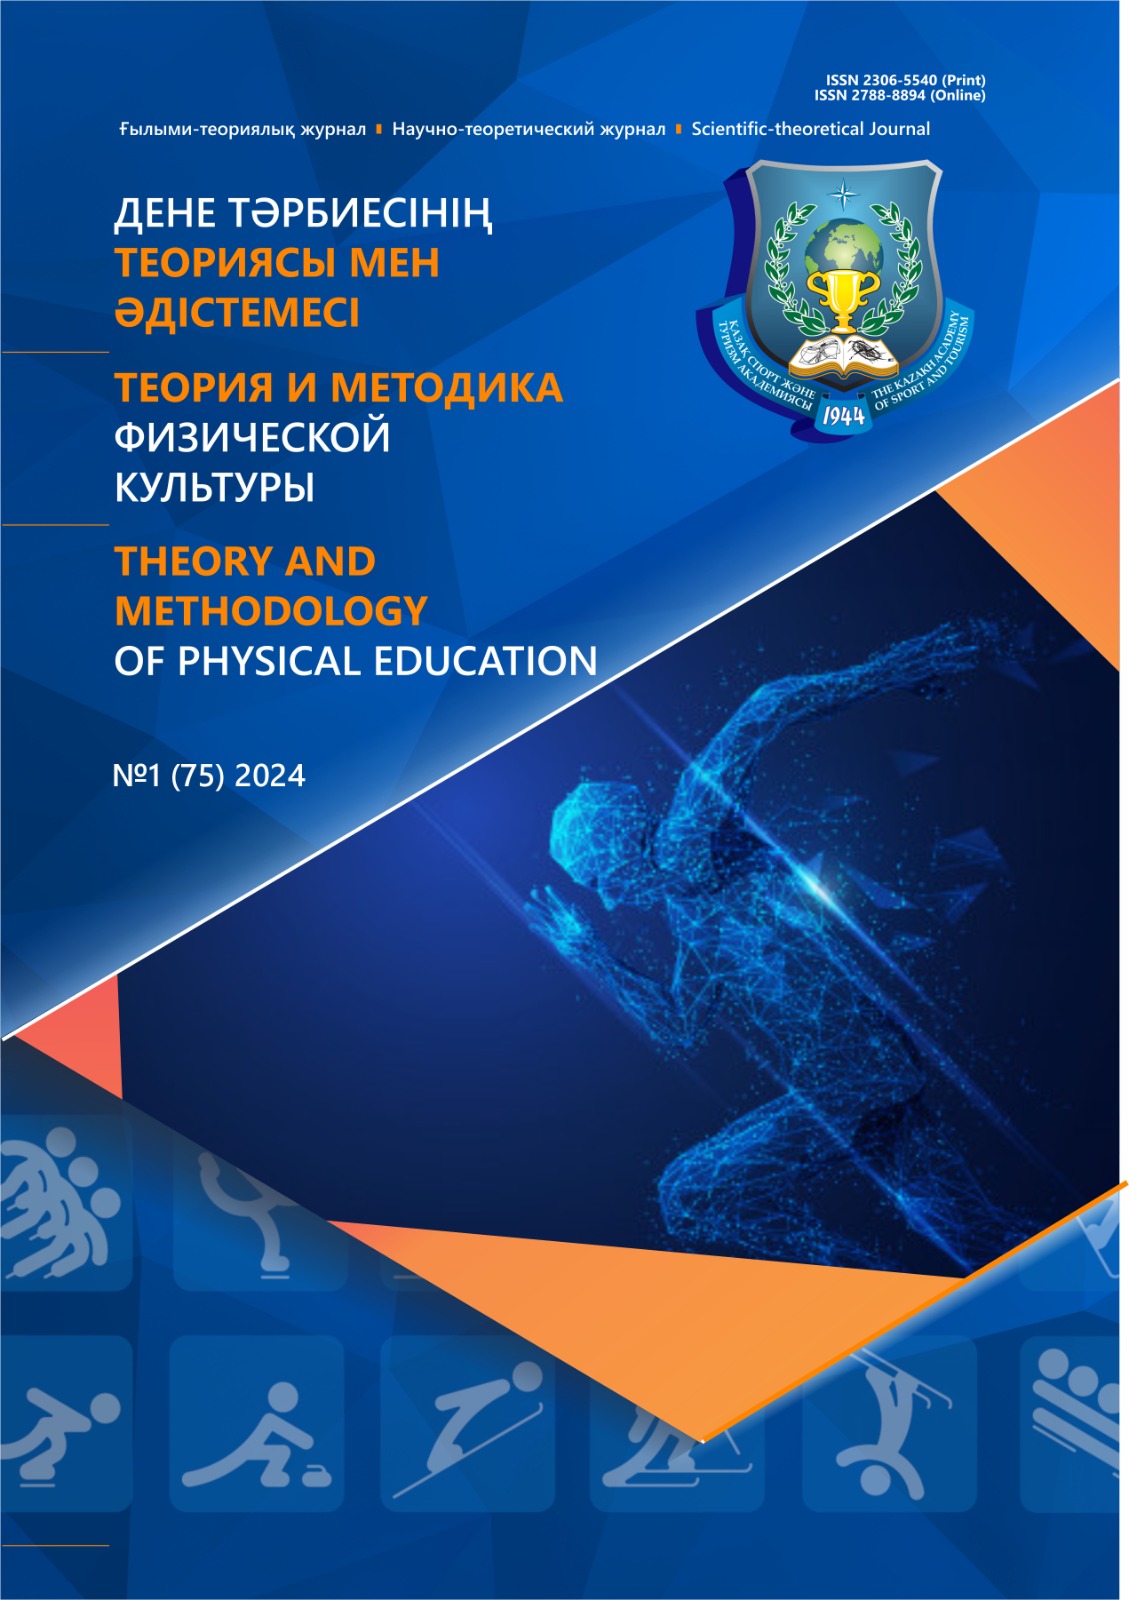 					View Vol. 75 No. 1 (2024): THEORY AND METHODOLOGY OF PHYSICAL EDUCATION
				